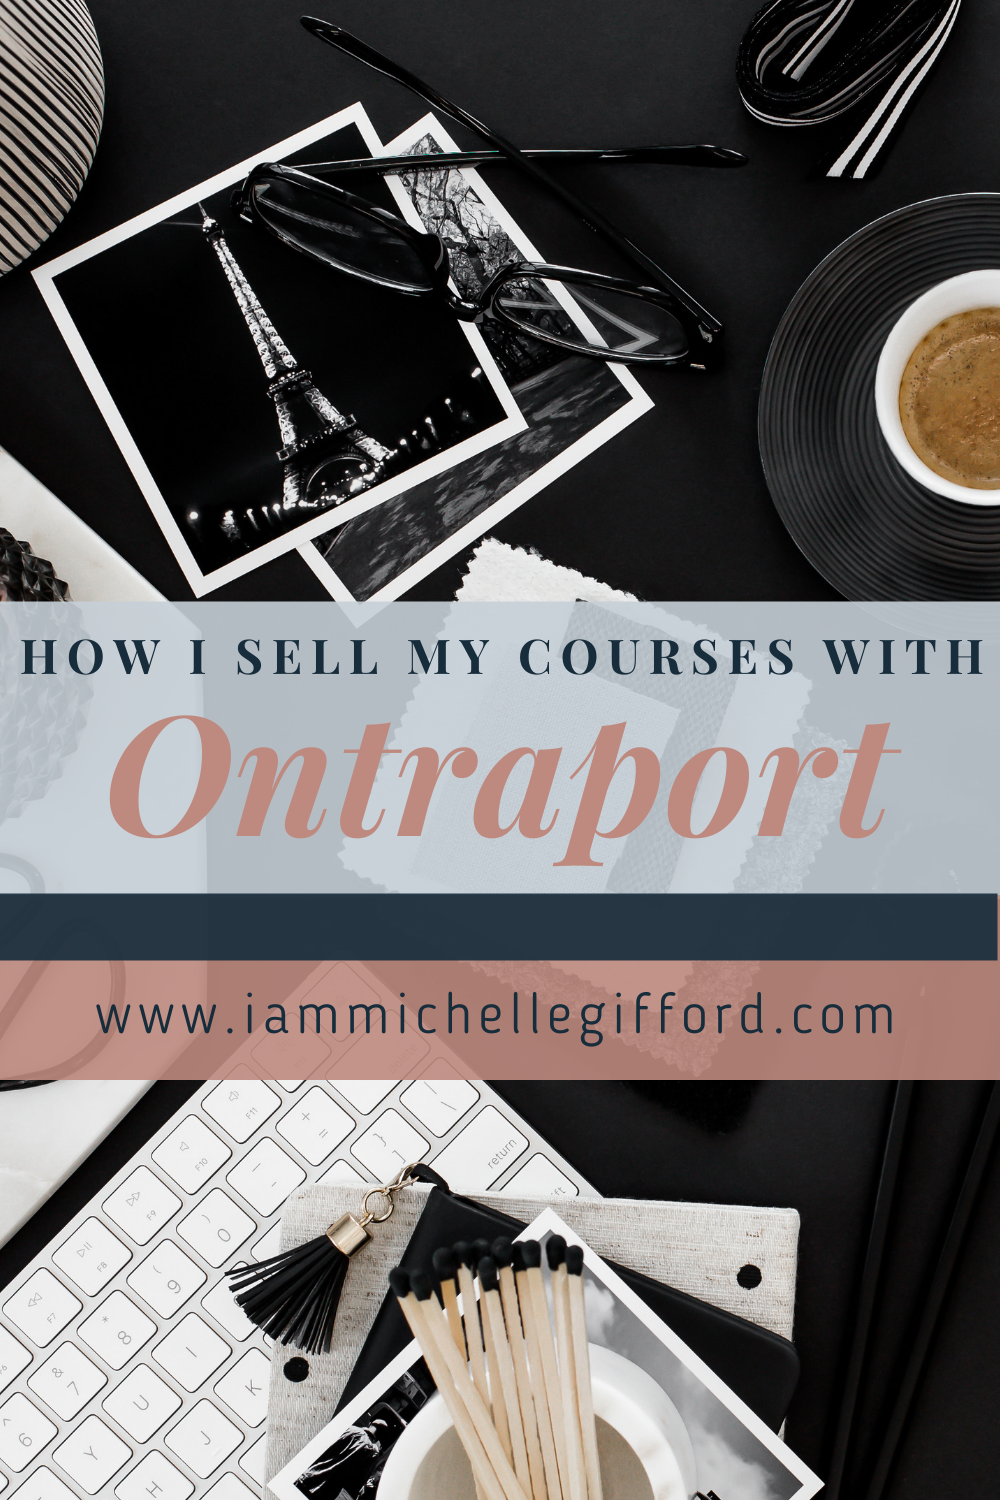 How I Sell My Courses with Ontraport- www.iammichellegifford.com